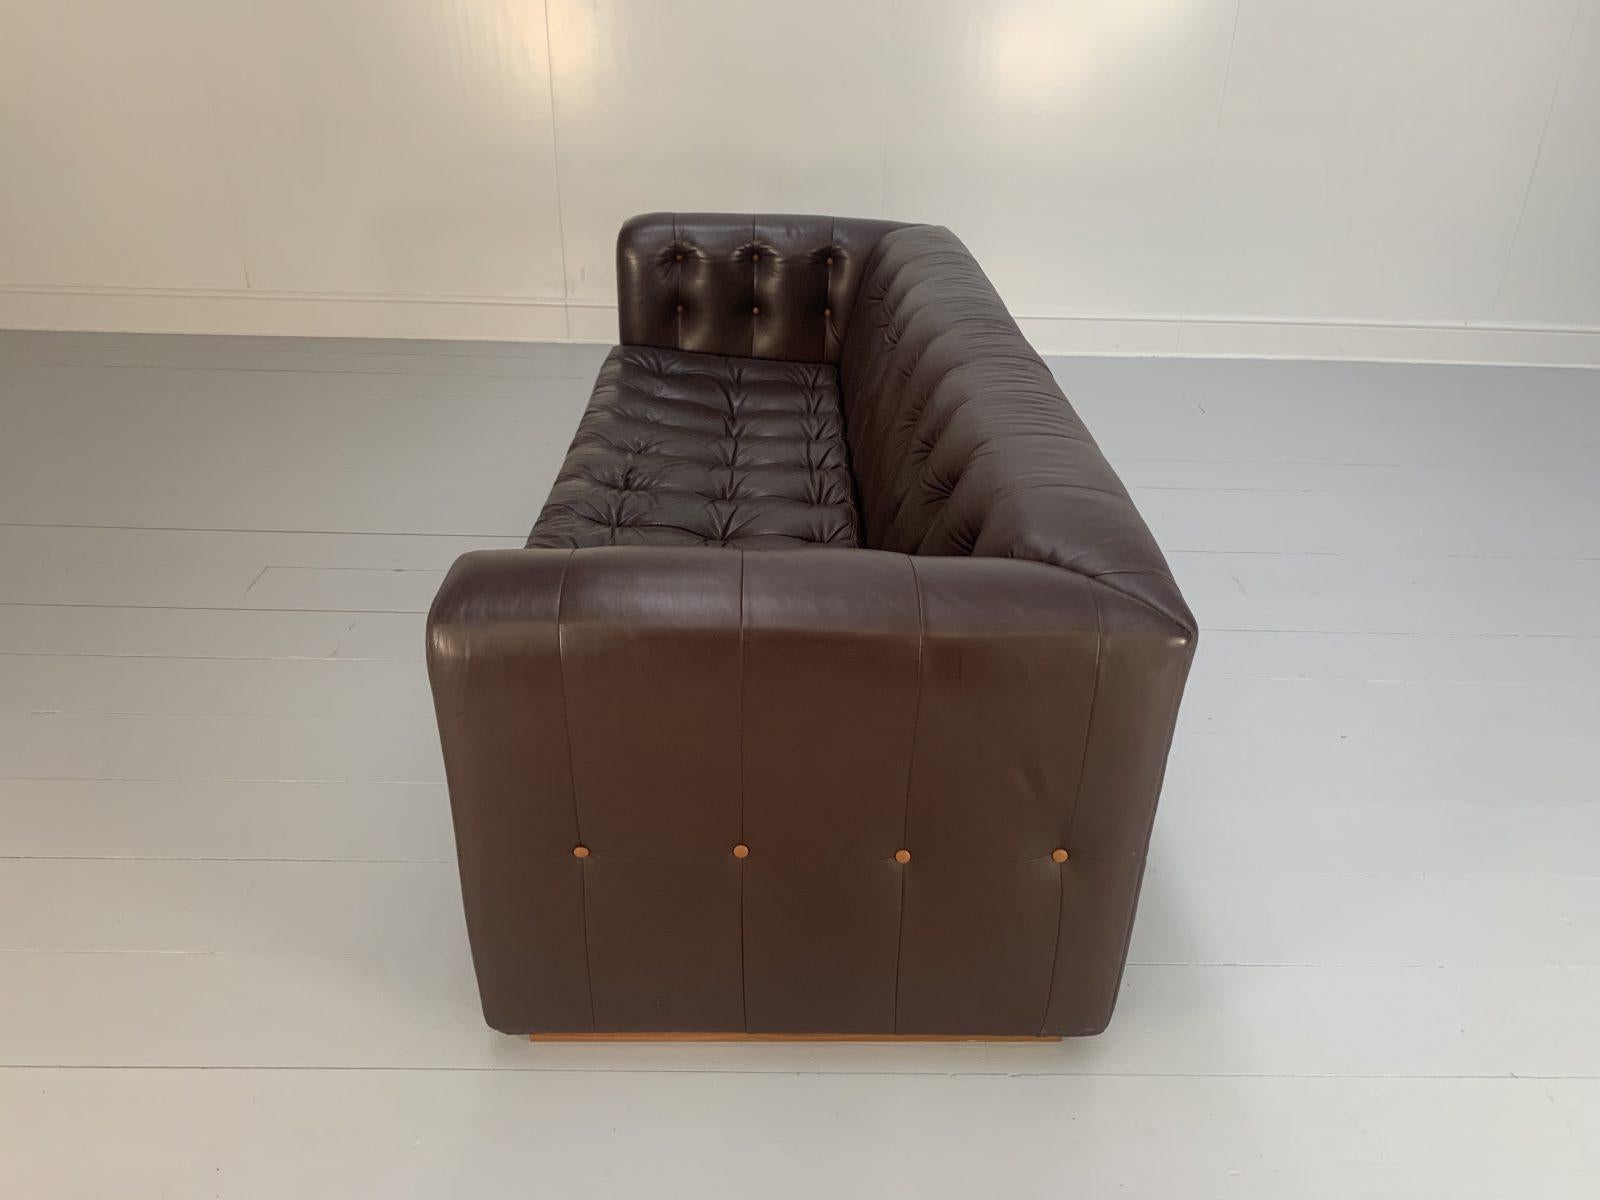 David Linley “Yoxford” Chesterfield 3-Seat Sofa in Brown Leather For Sale 9